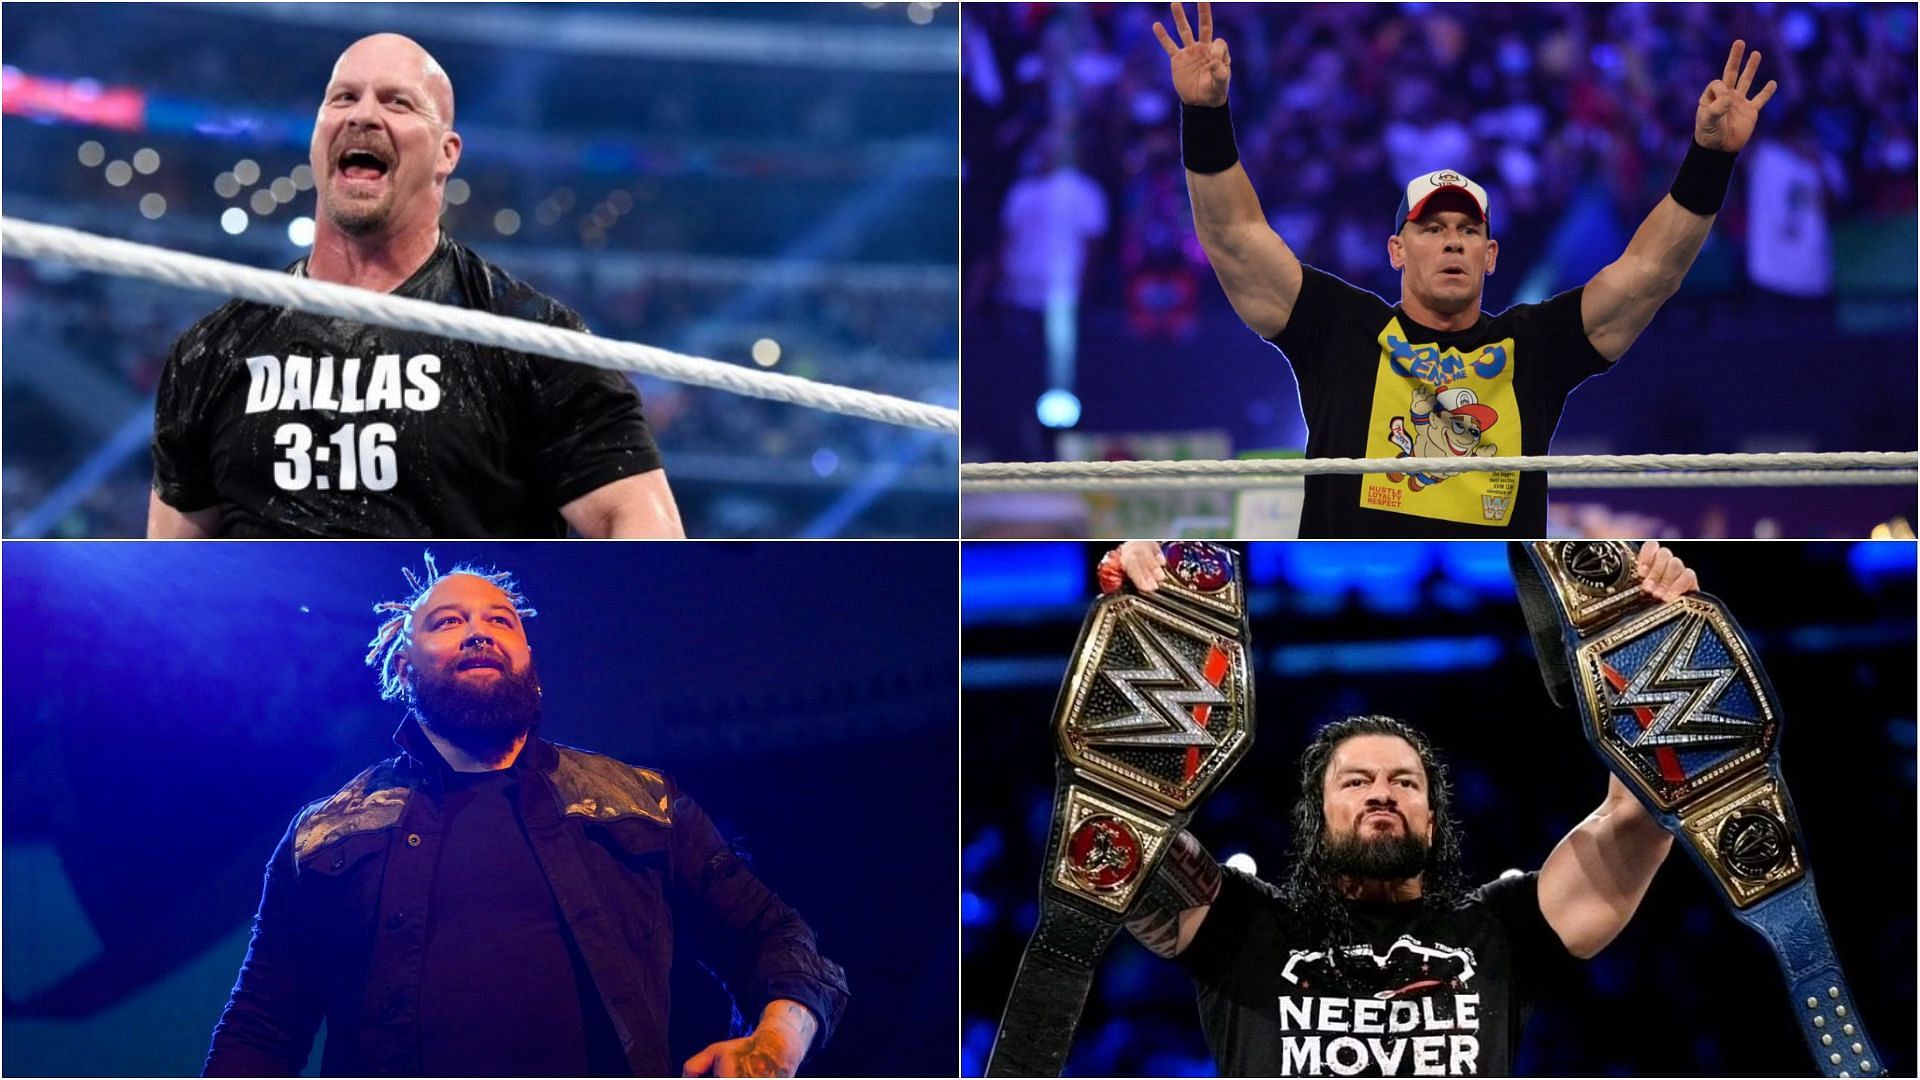 WrestleMania 39 is not the right stage for some incredible bouts